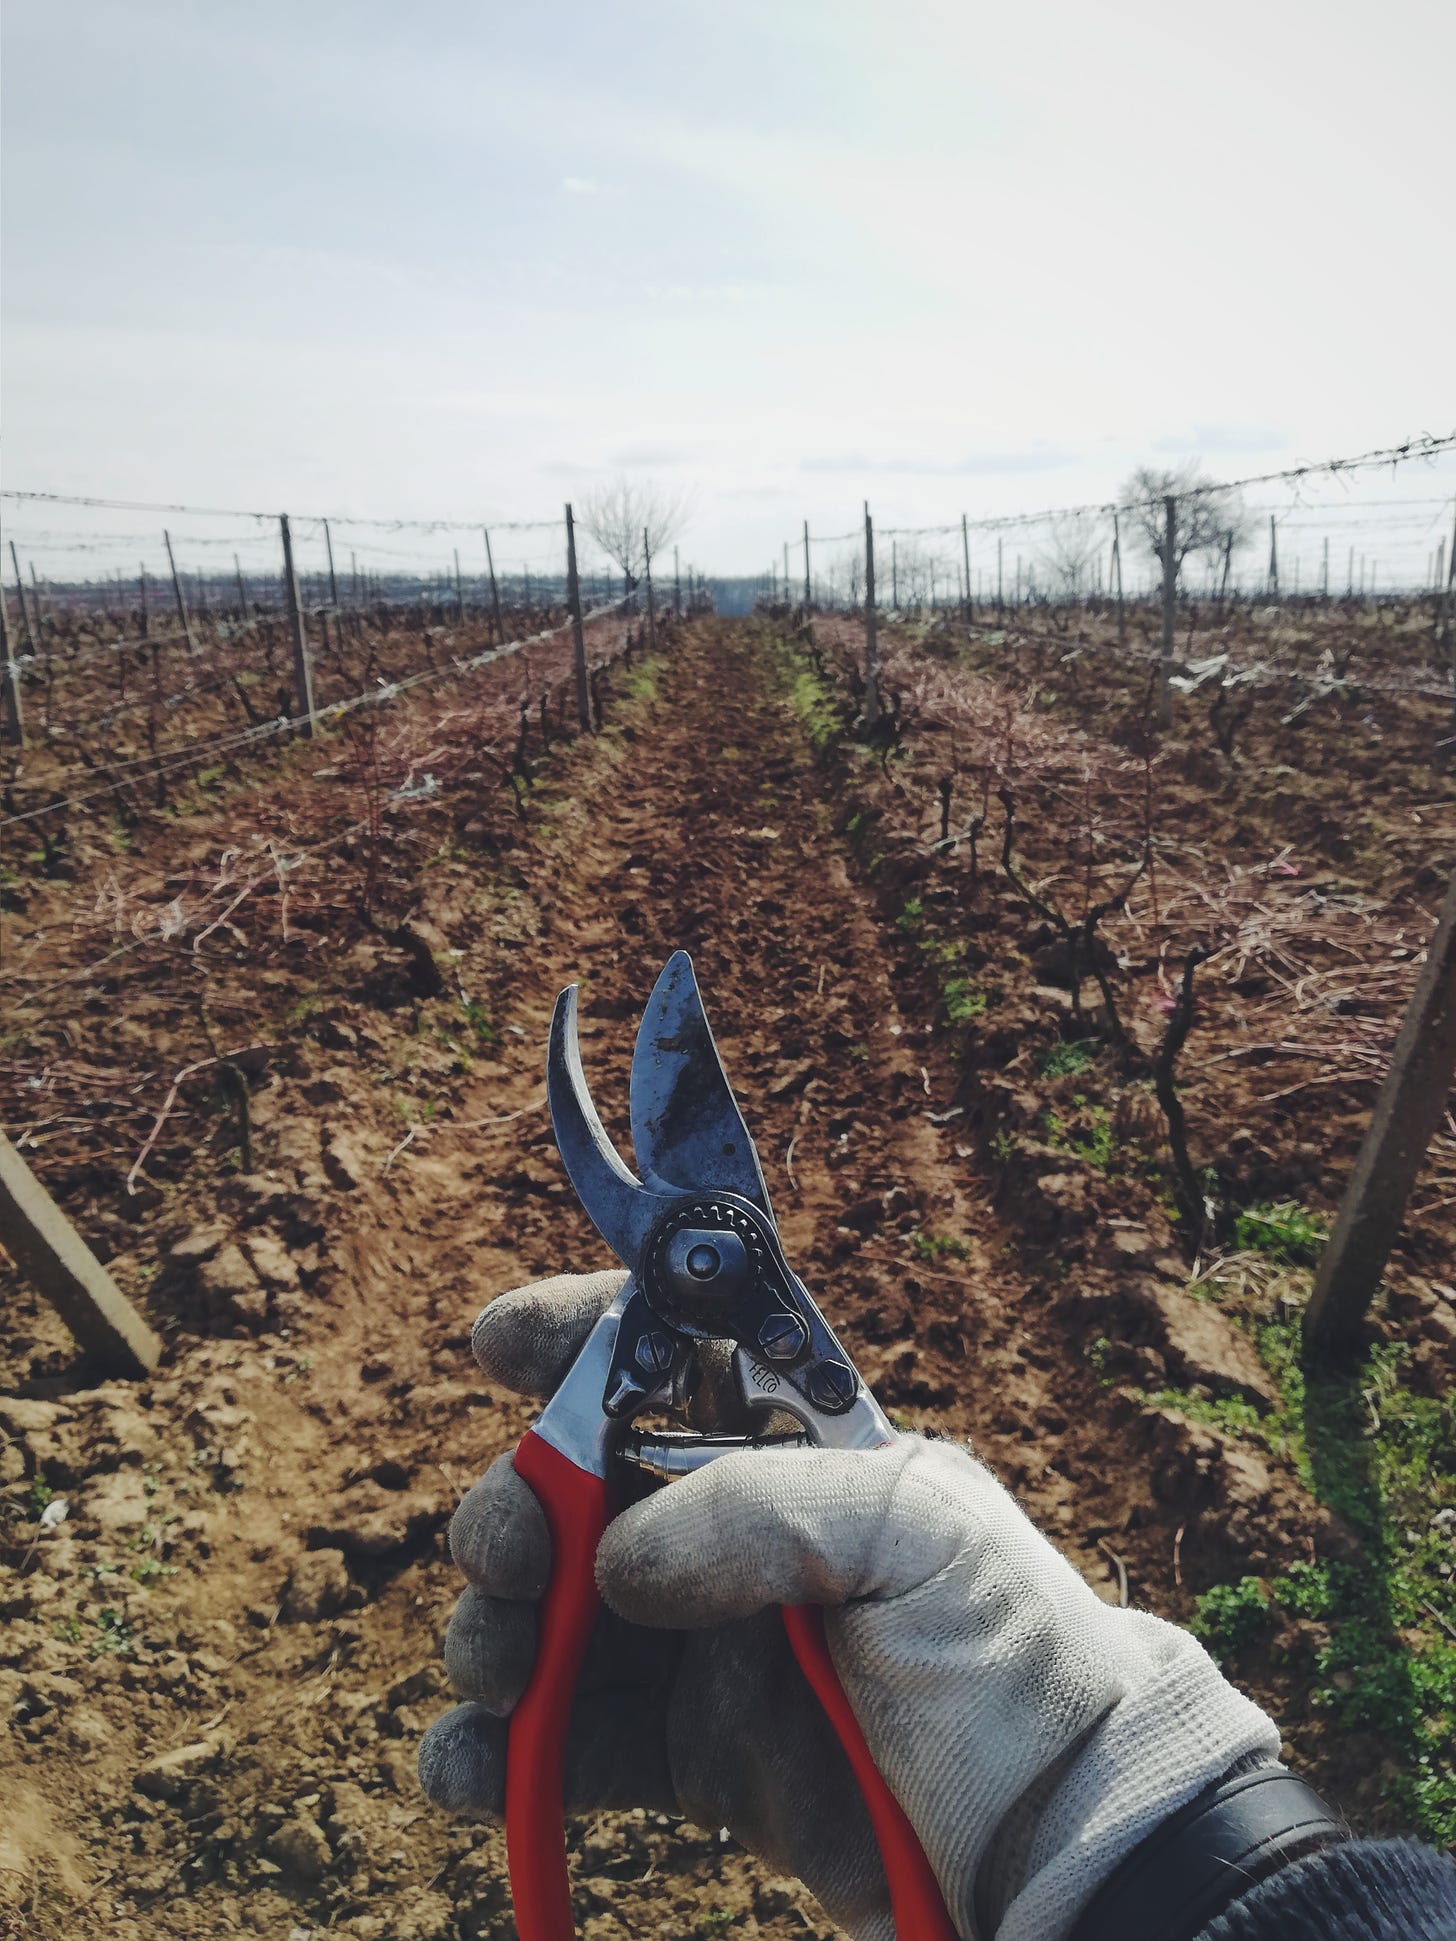 photo of a pair of pruning shears, being held by a person's hand. the person's hand is in the bottom center of the photo, wearing a grey cloth glove. the shears are held open, ready to cut. person is standing in a brown dirt field between two long rows of short plants. rows of supporting fences and dirt stretch all the way up the photo view into the distance. the sky at the top of the photo is light blue and grey.